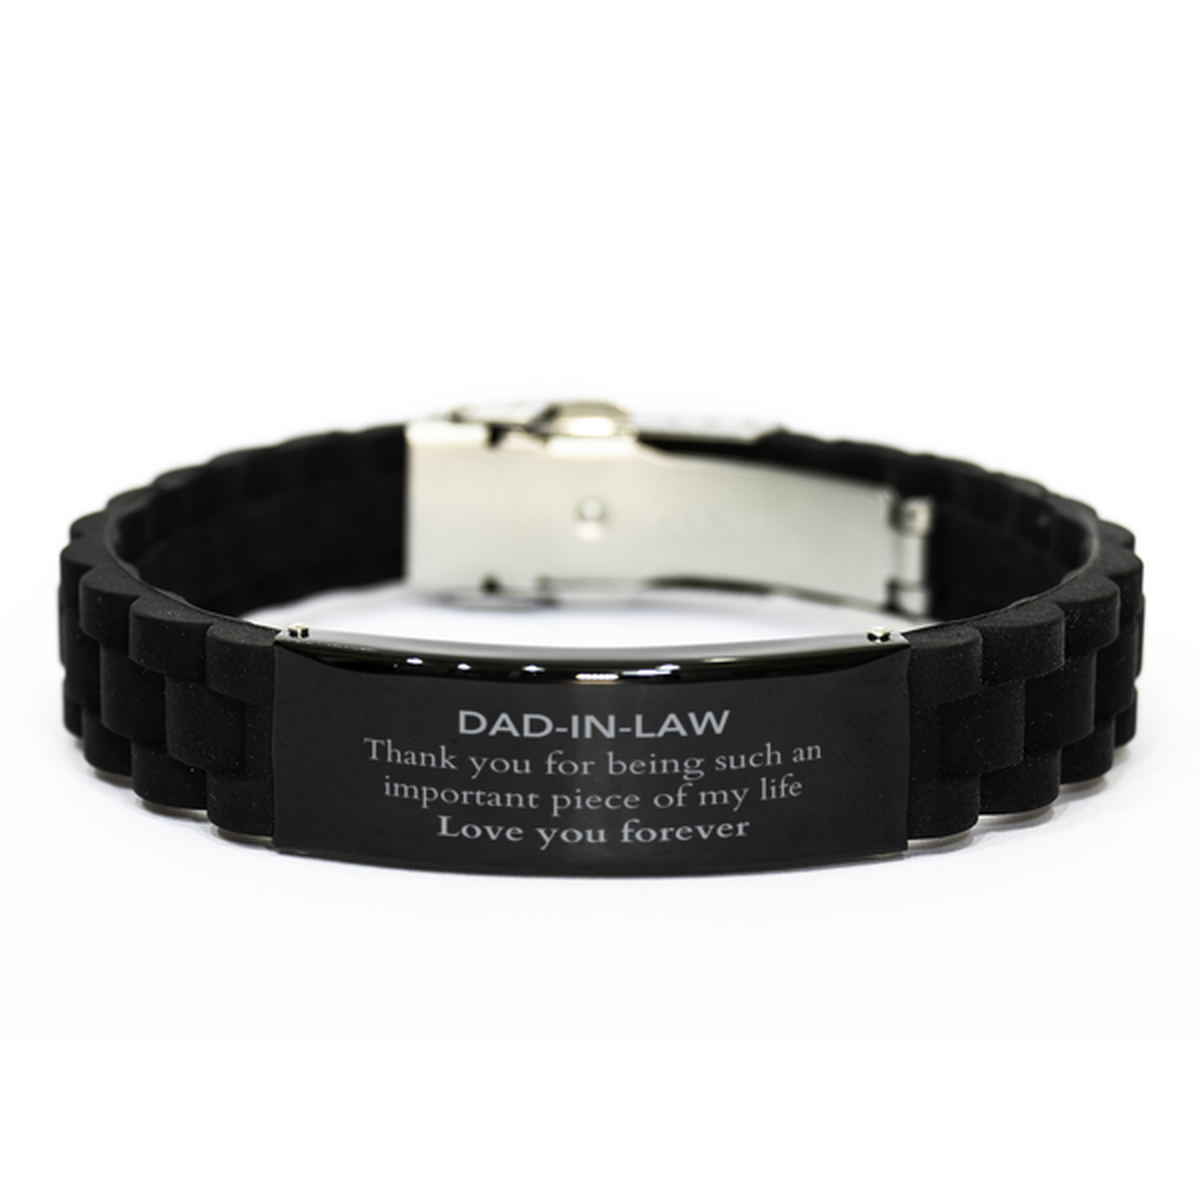 Appropriate Dad-in-law Black Glidelock Clasp Bracelet Epic Birthday Gifts for Dad-in-law Thank you for being such an important piece of my life Dad-in-law Christmas Mothers Fathers Day